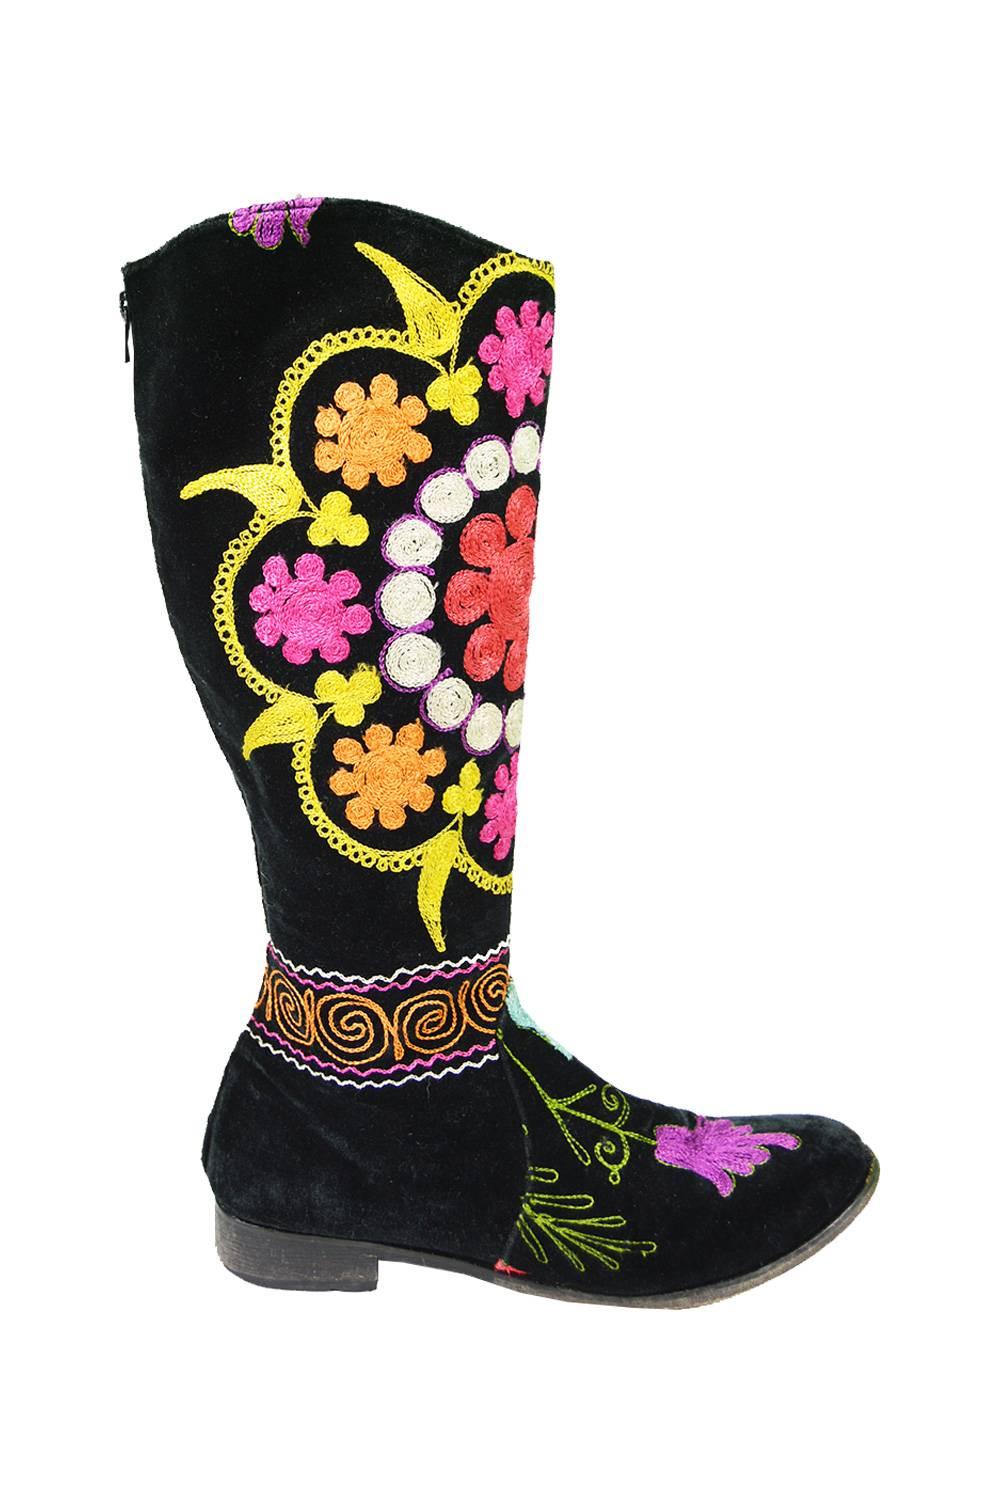 Vintage 1990s Black Velvet & Multicolored Turkish Suzani Style Embroidered Boho Boots

Size: Marked EU 41, approximately a UK 7.5 / US 10. Please check measurements.
Length of insole - 25.5cm 
Width (Widest Part) - 10cm
Overall Height - 43cm 
Heel